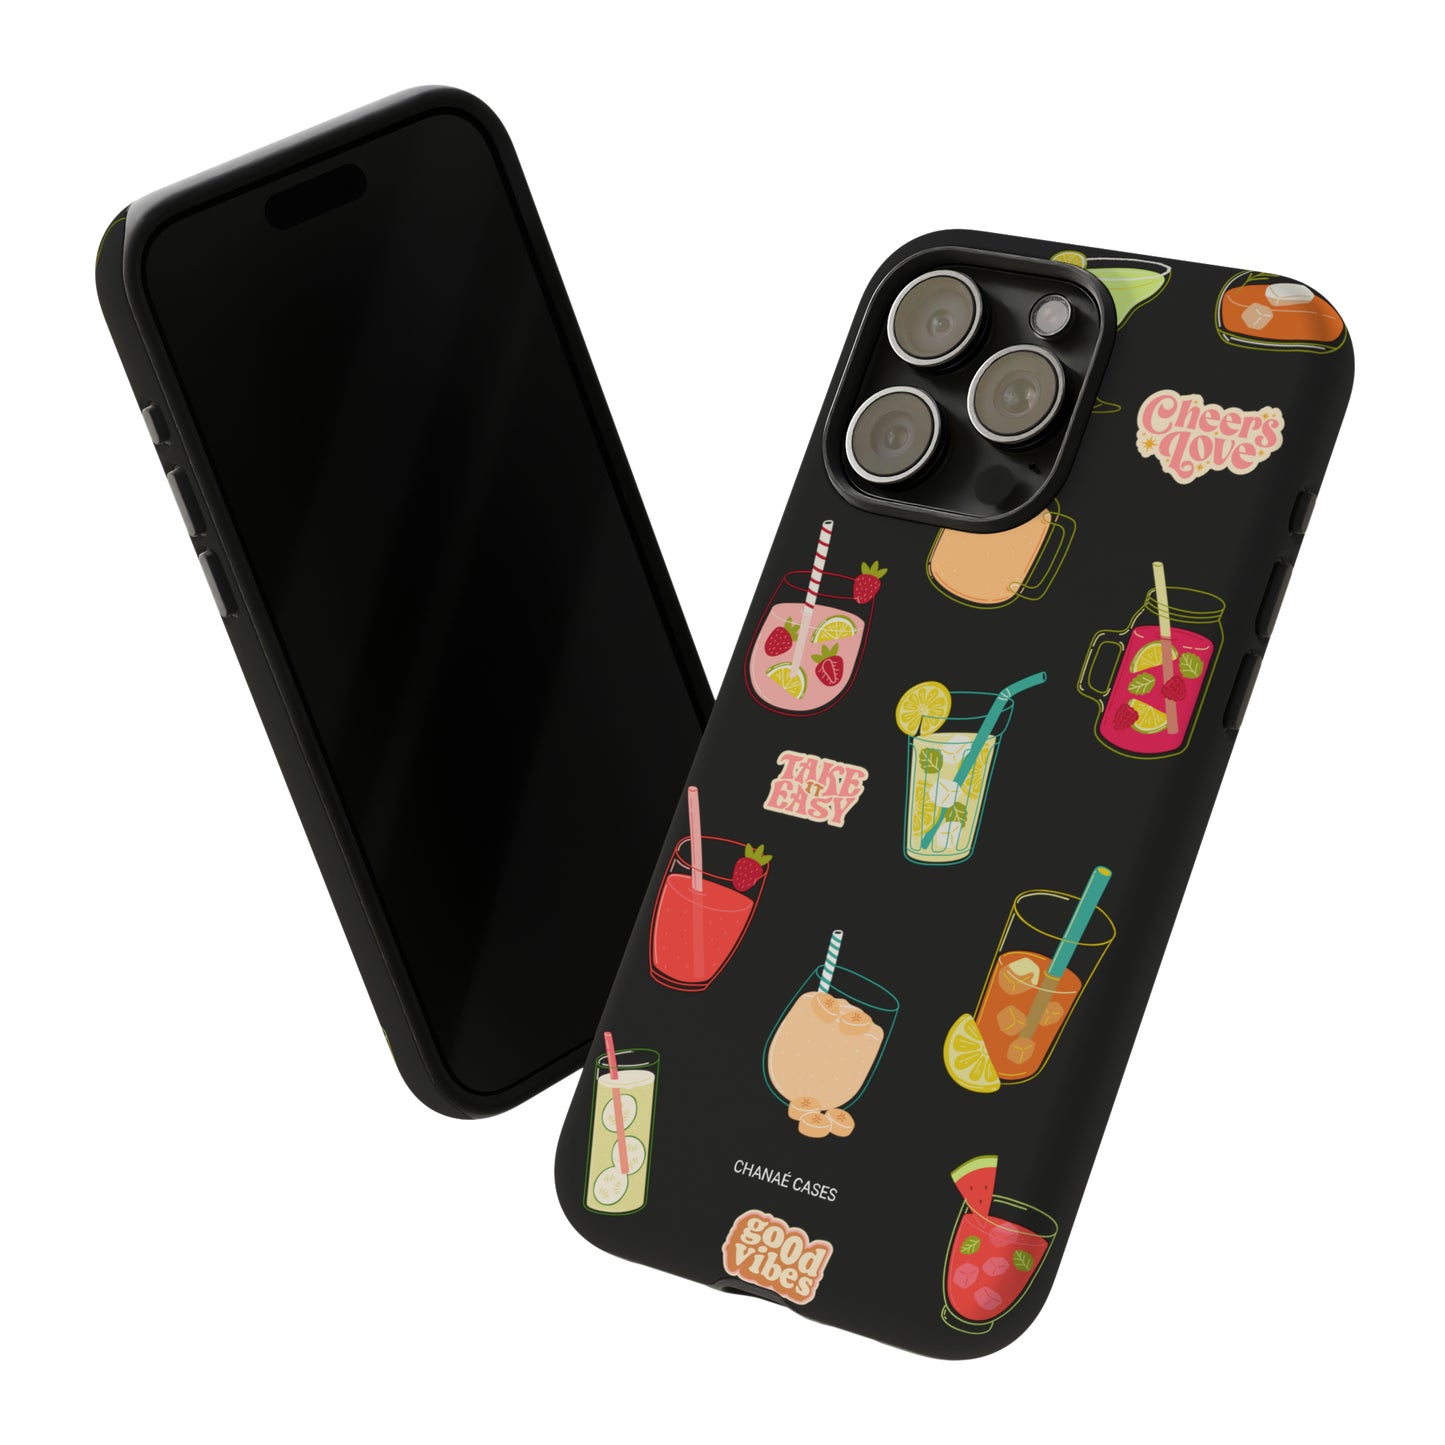 Two-For-One iPhone "Tough" Case (Black)